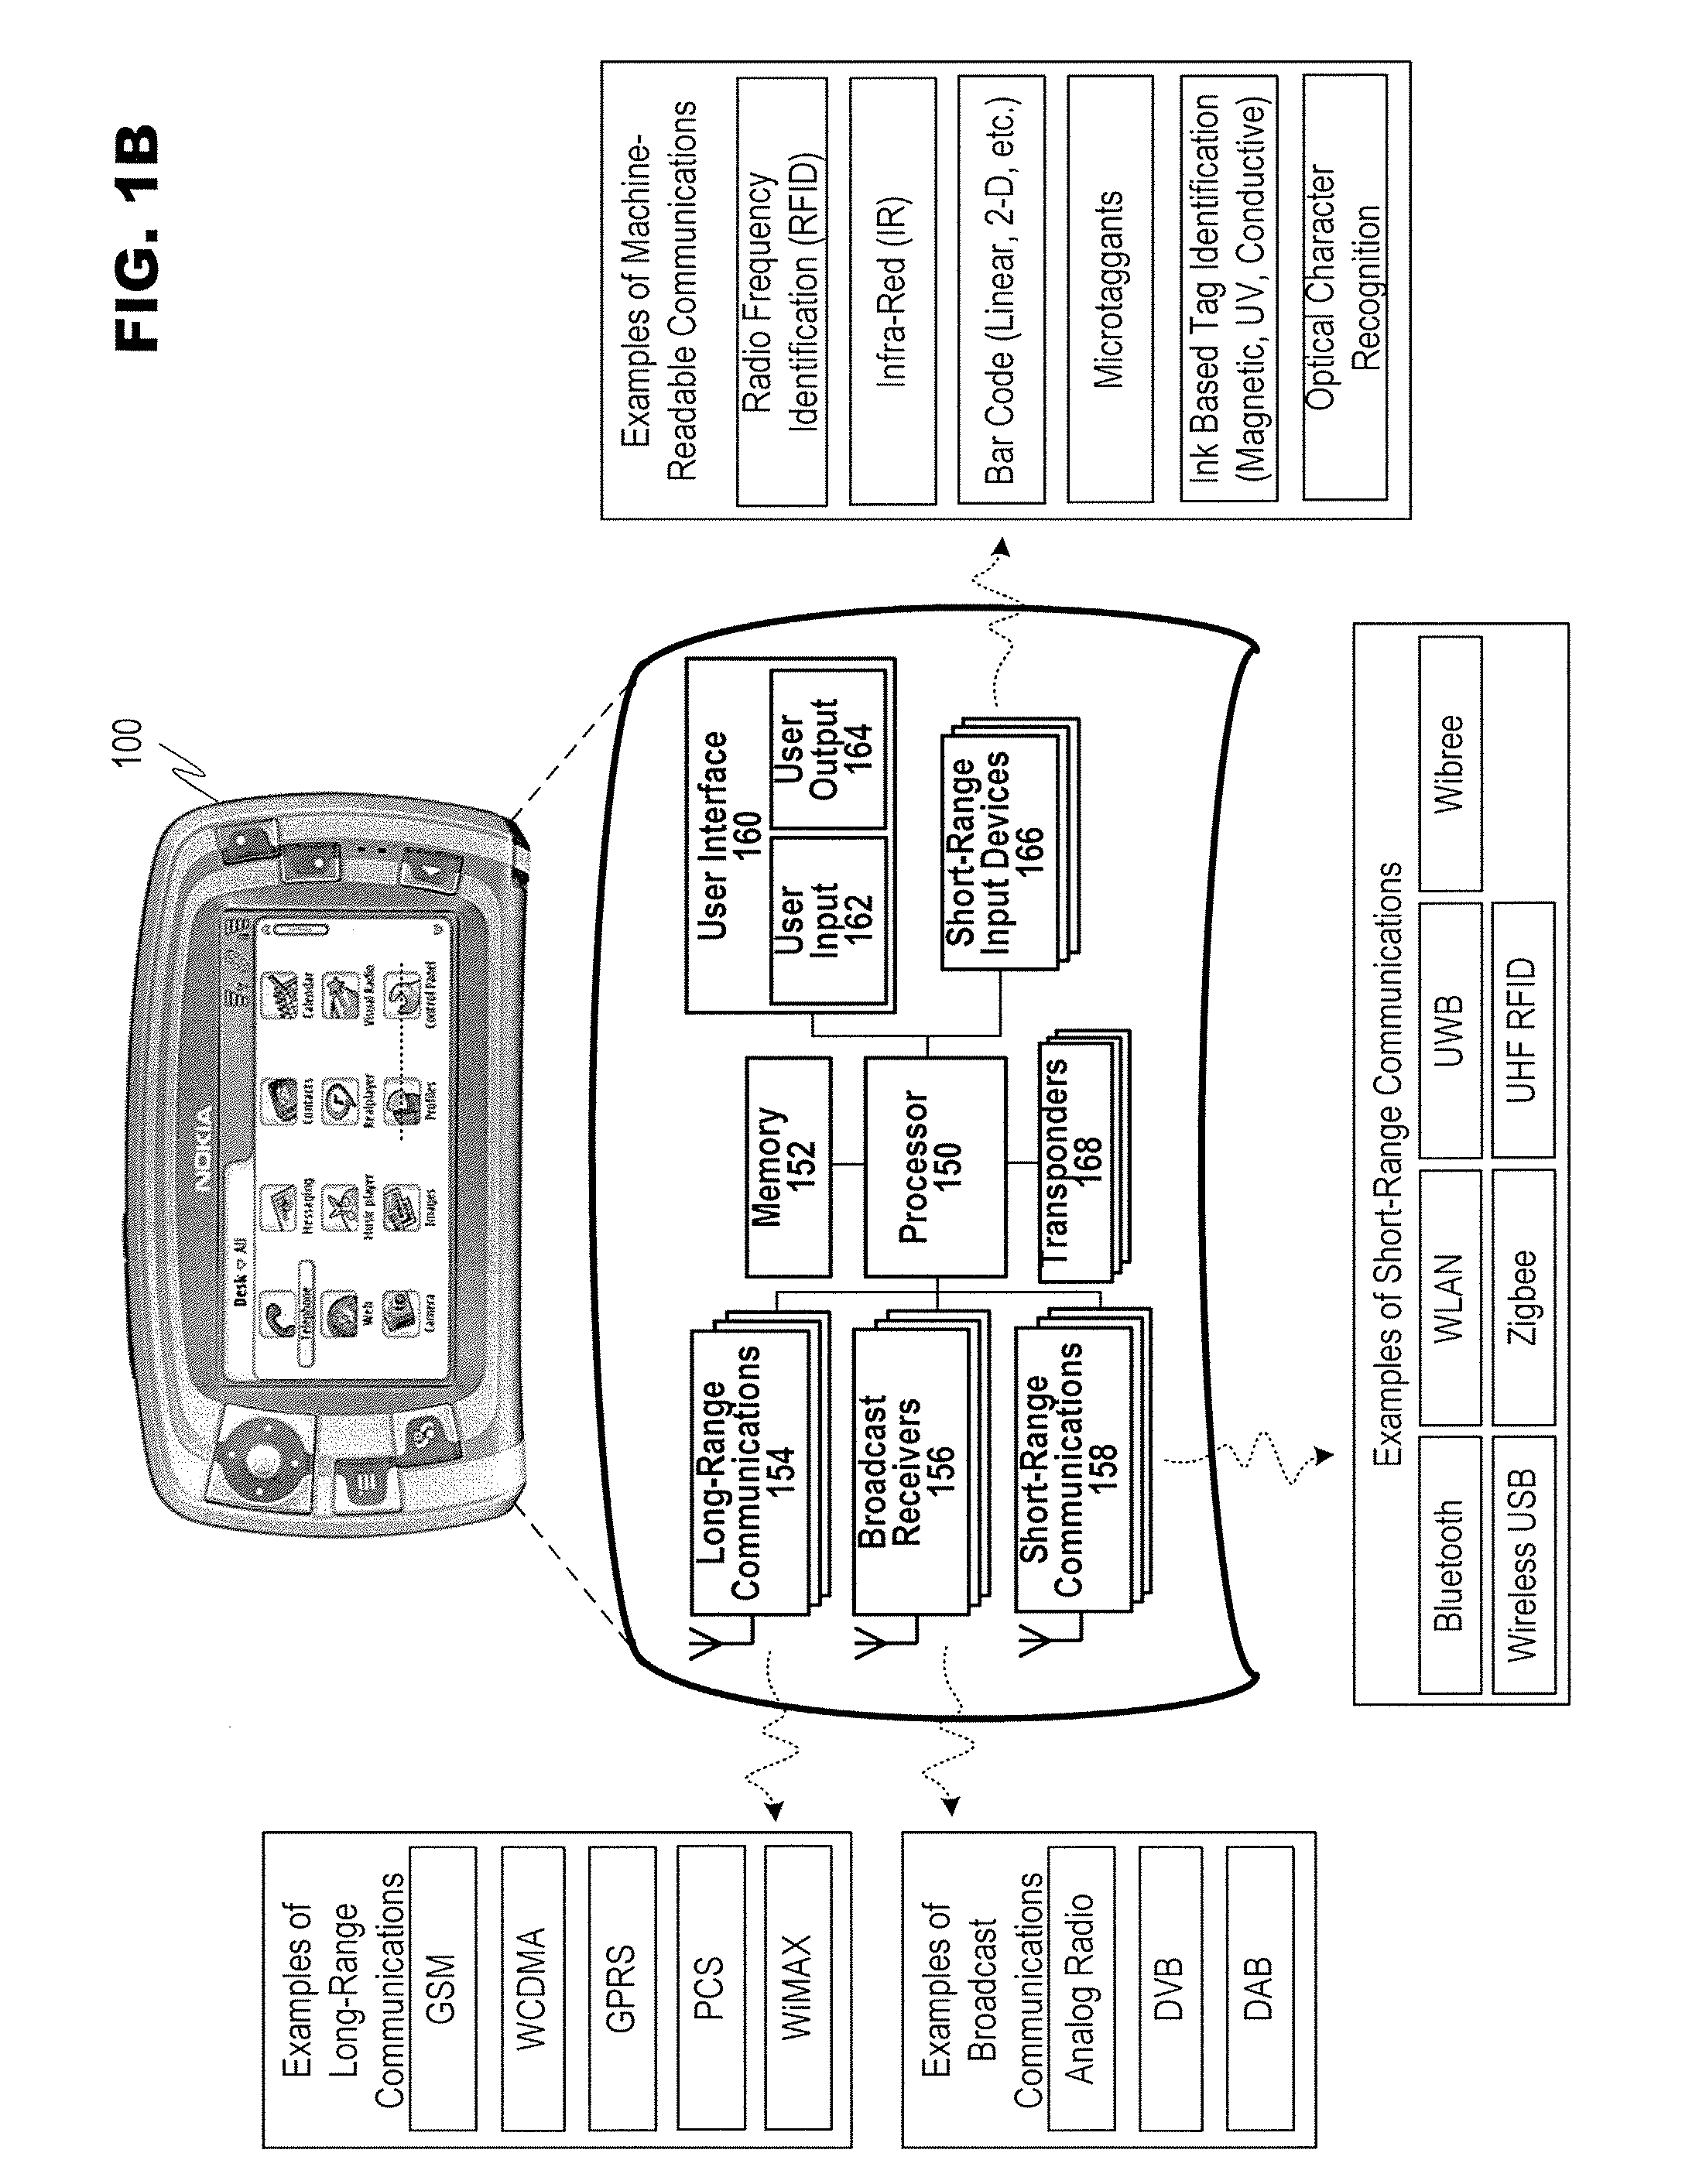 Method and apparatus for propagating encryption keys between wireless communication devices